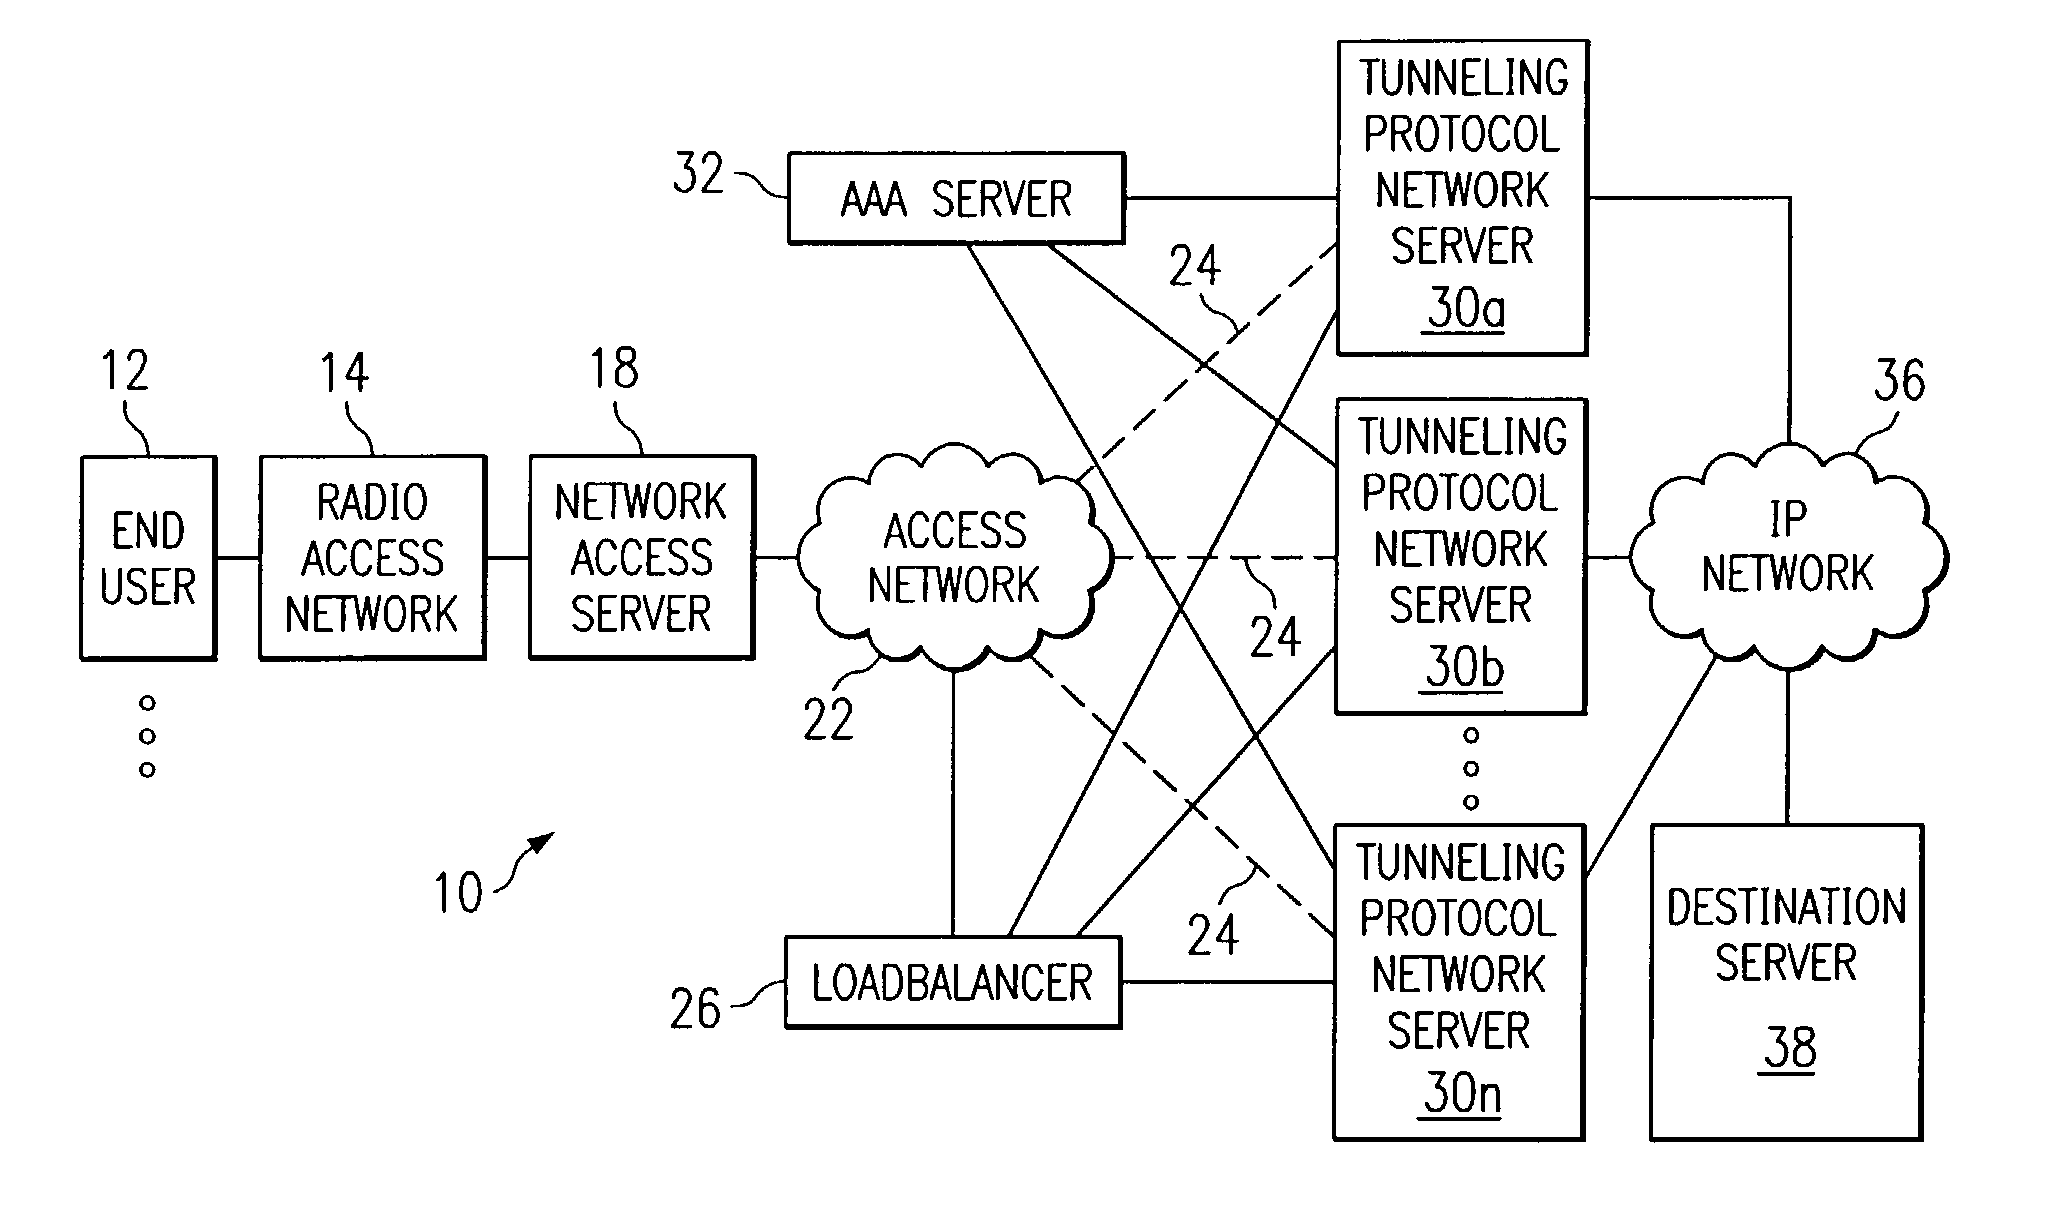 System and method for communicating in a loadbalancing environment